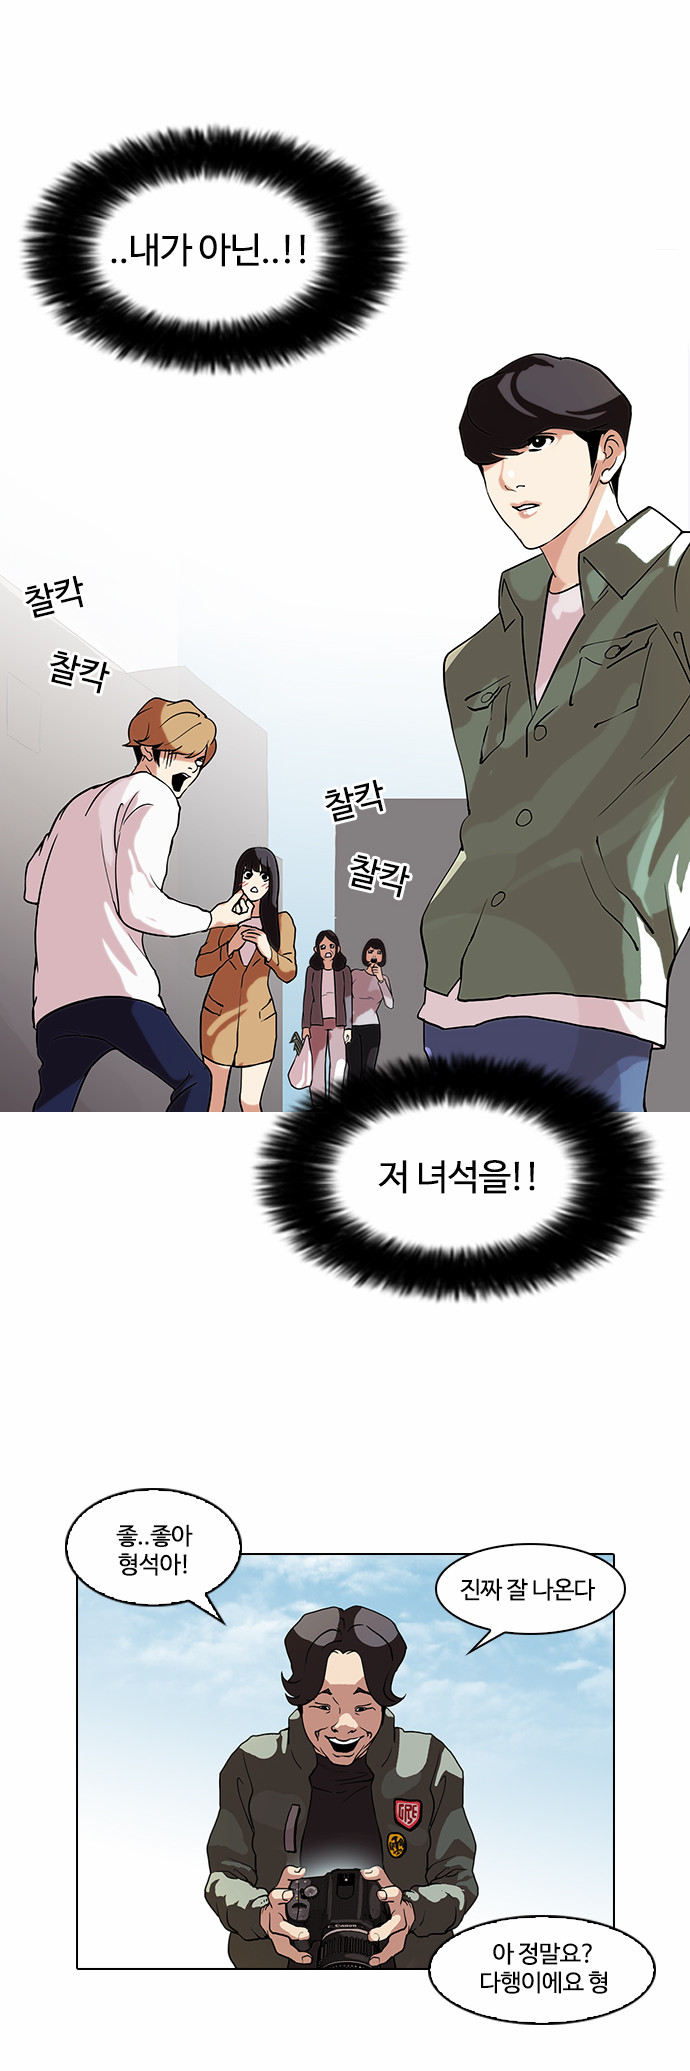 Lookism - Chapter 72 - Page 3